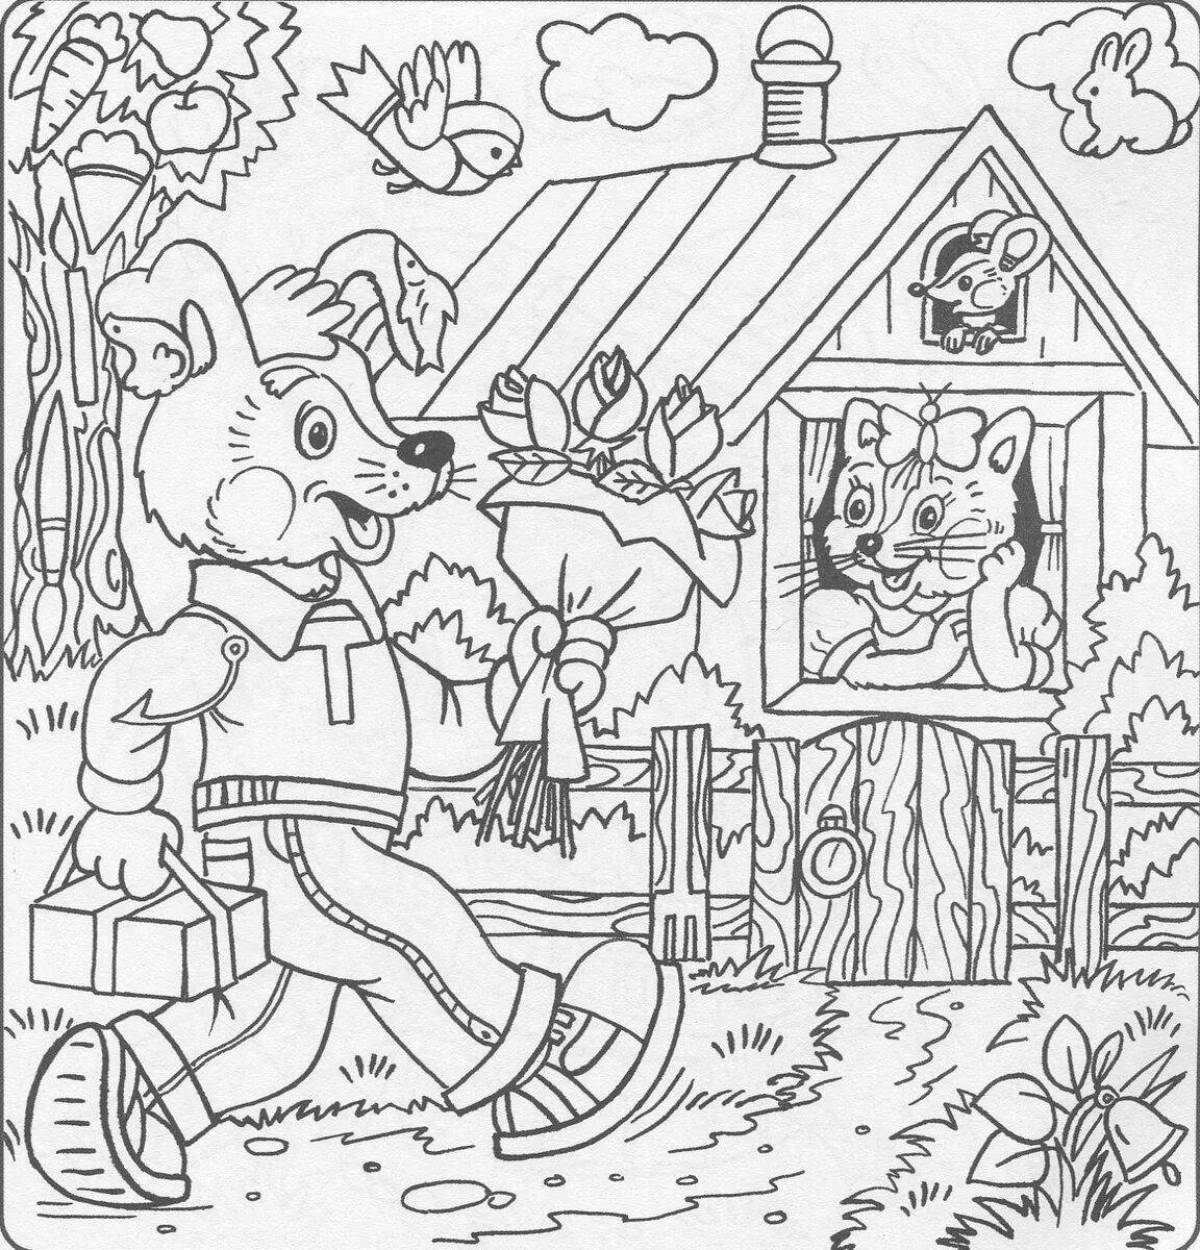 Fun coloring book for mindfulness